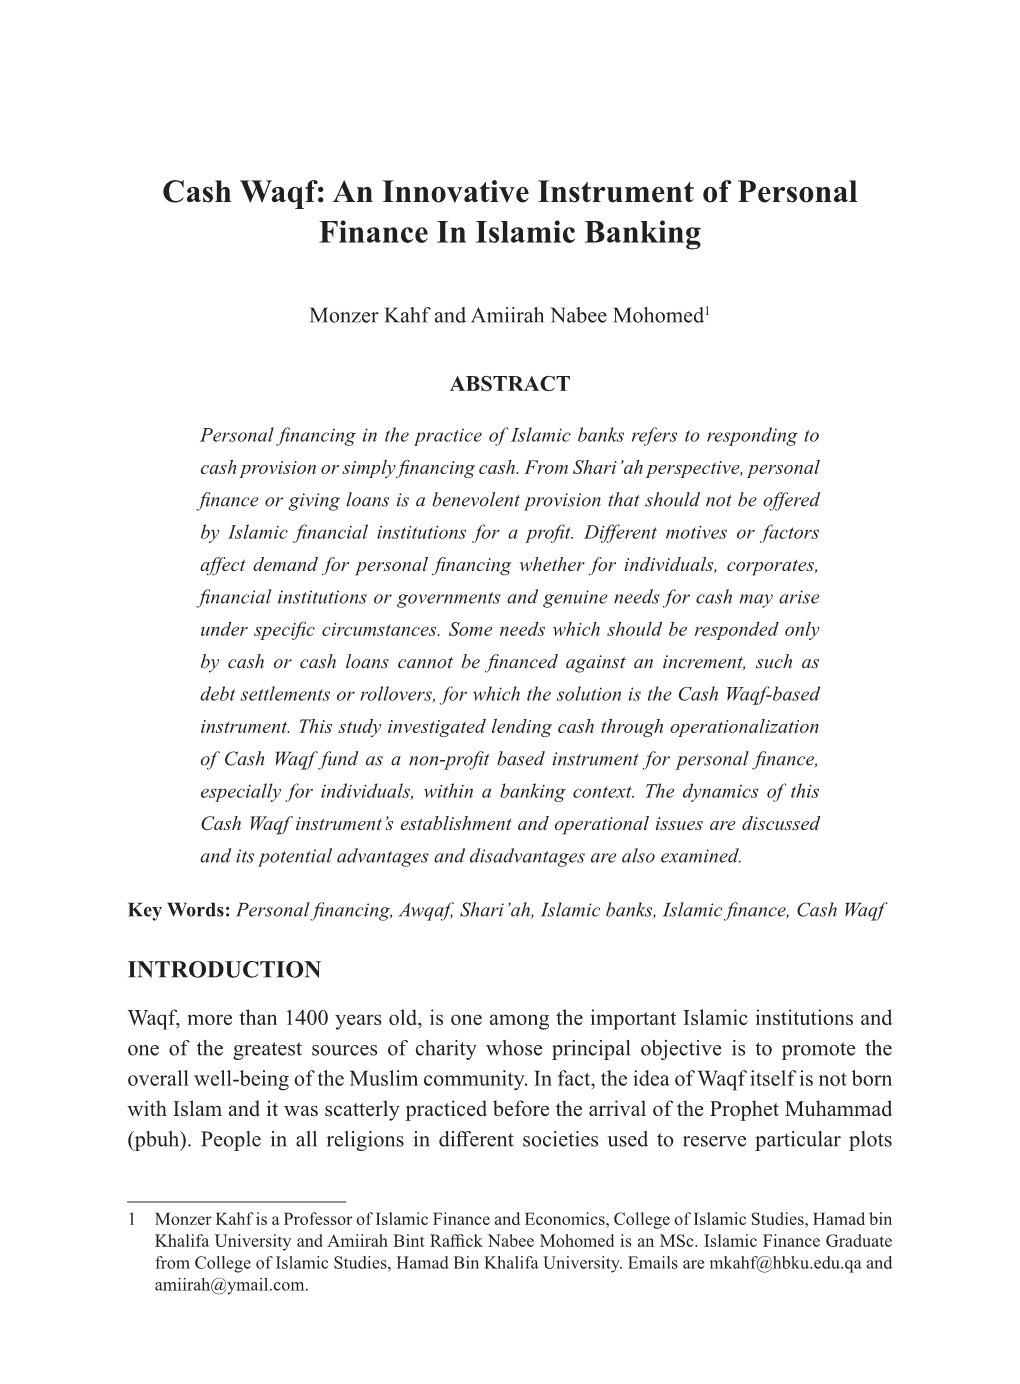 Cash Waqf: an Innovative Instrument of Personal Finance in Islamic Banking